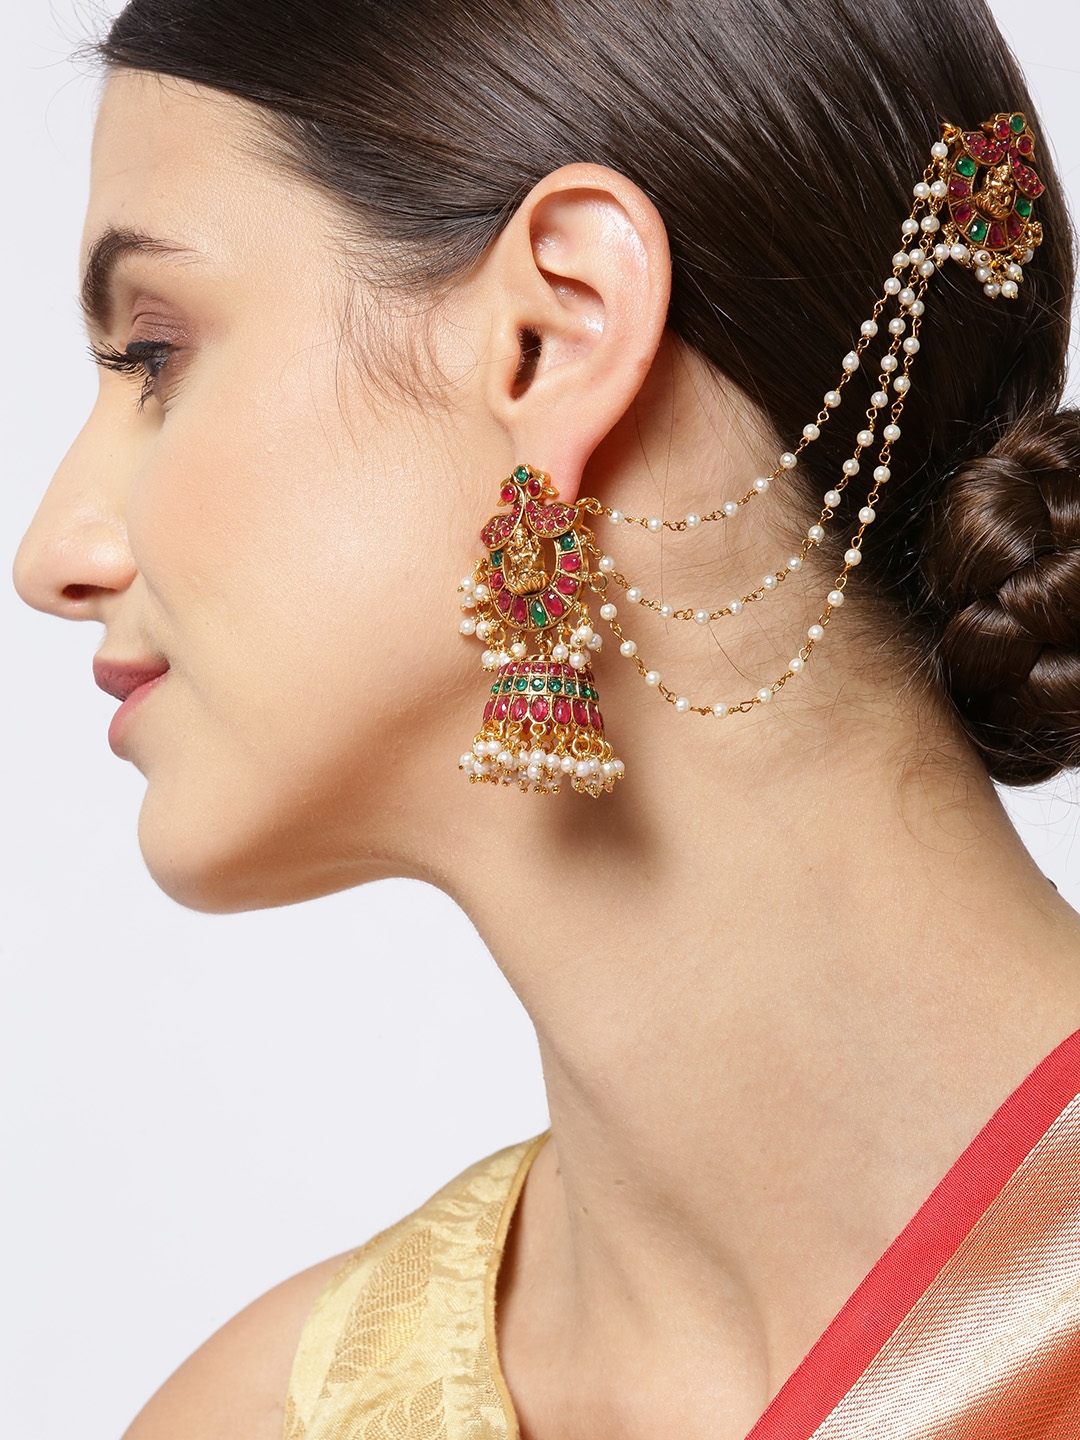 Bahubali Inspired Hair Accessories Designs  Ethnic Fashion Inspirations